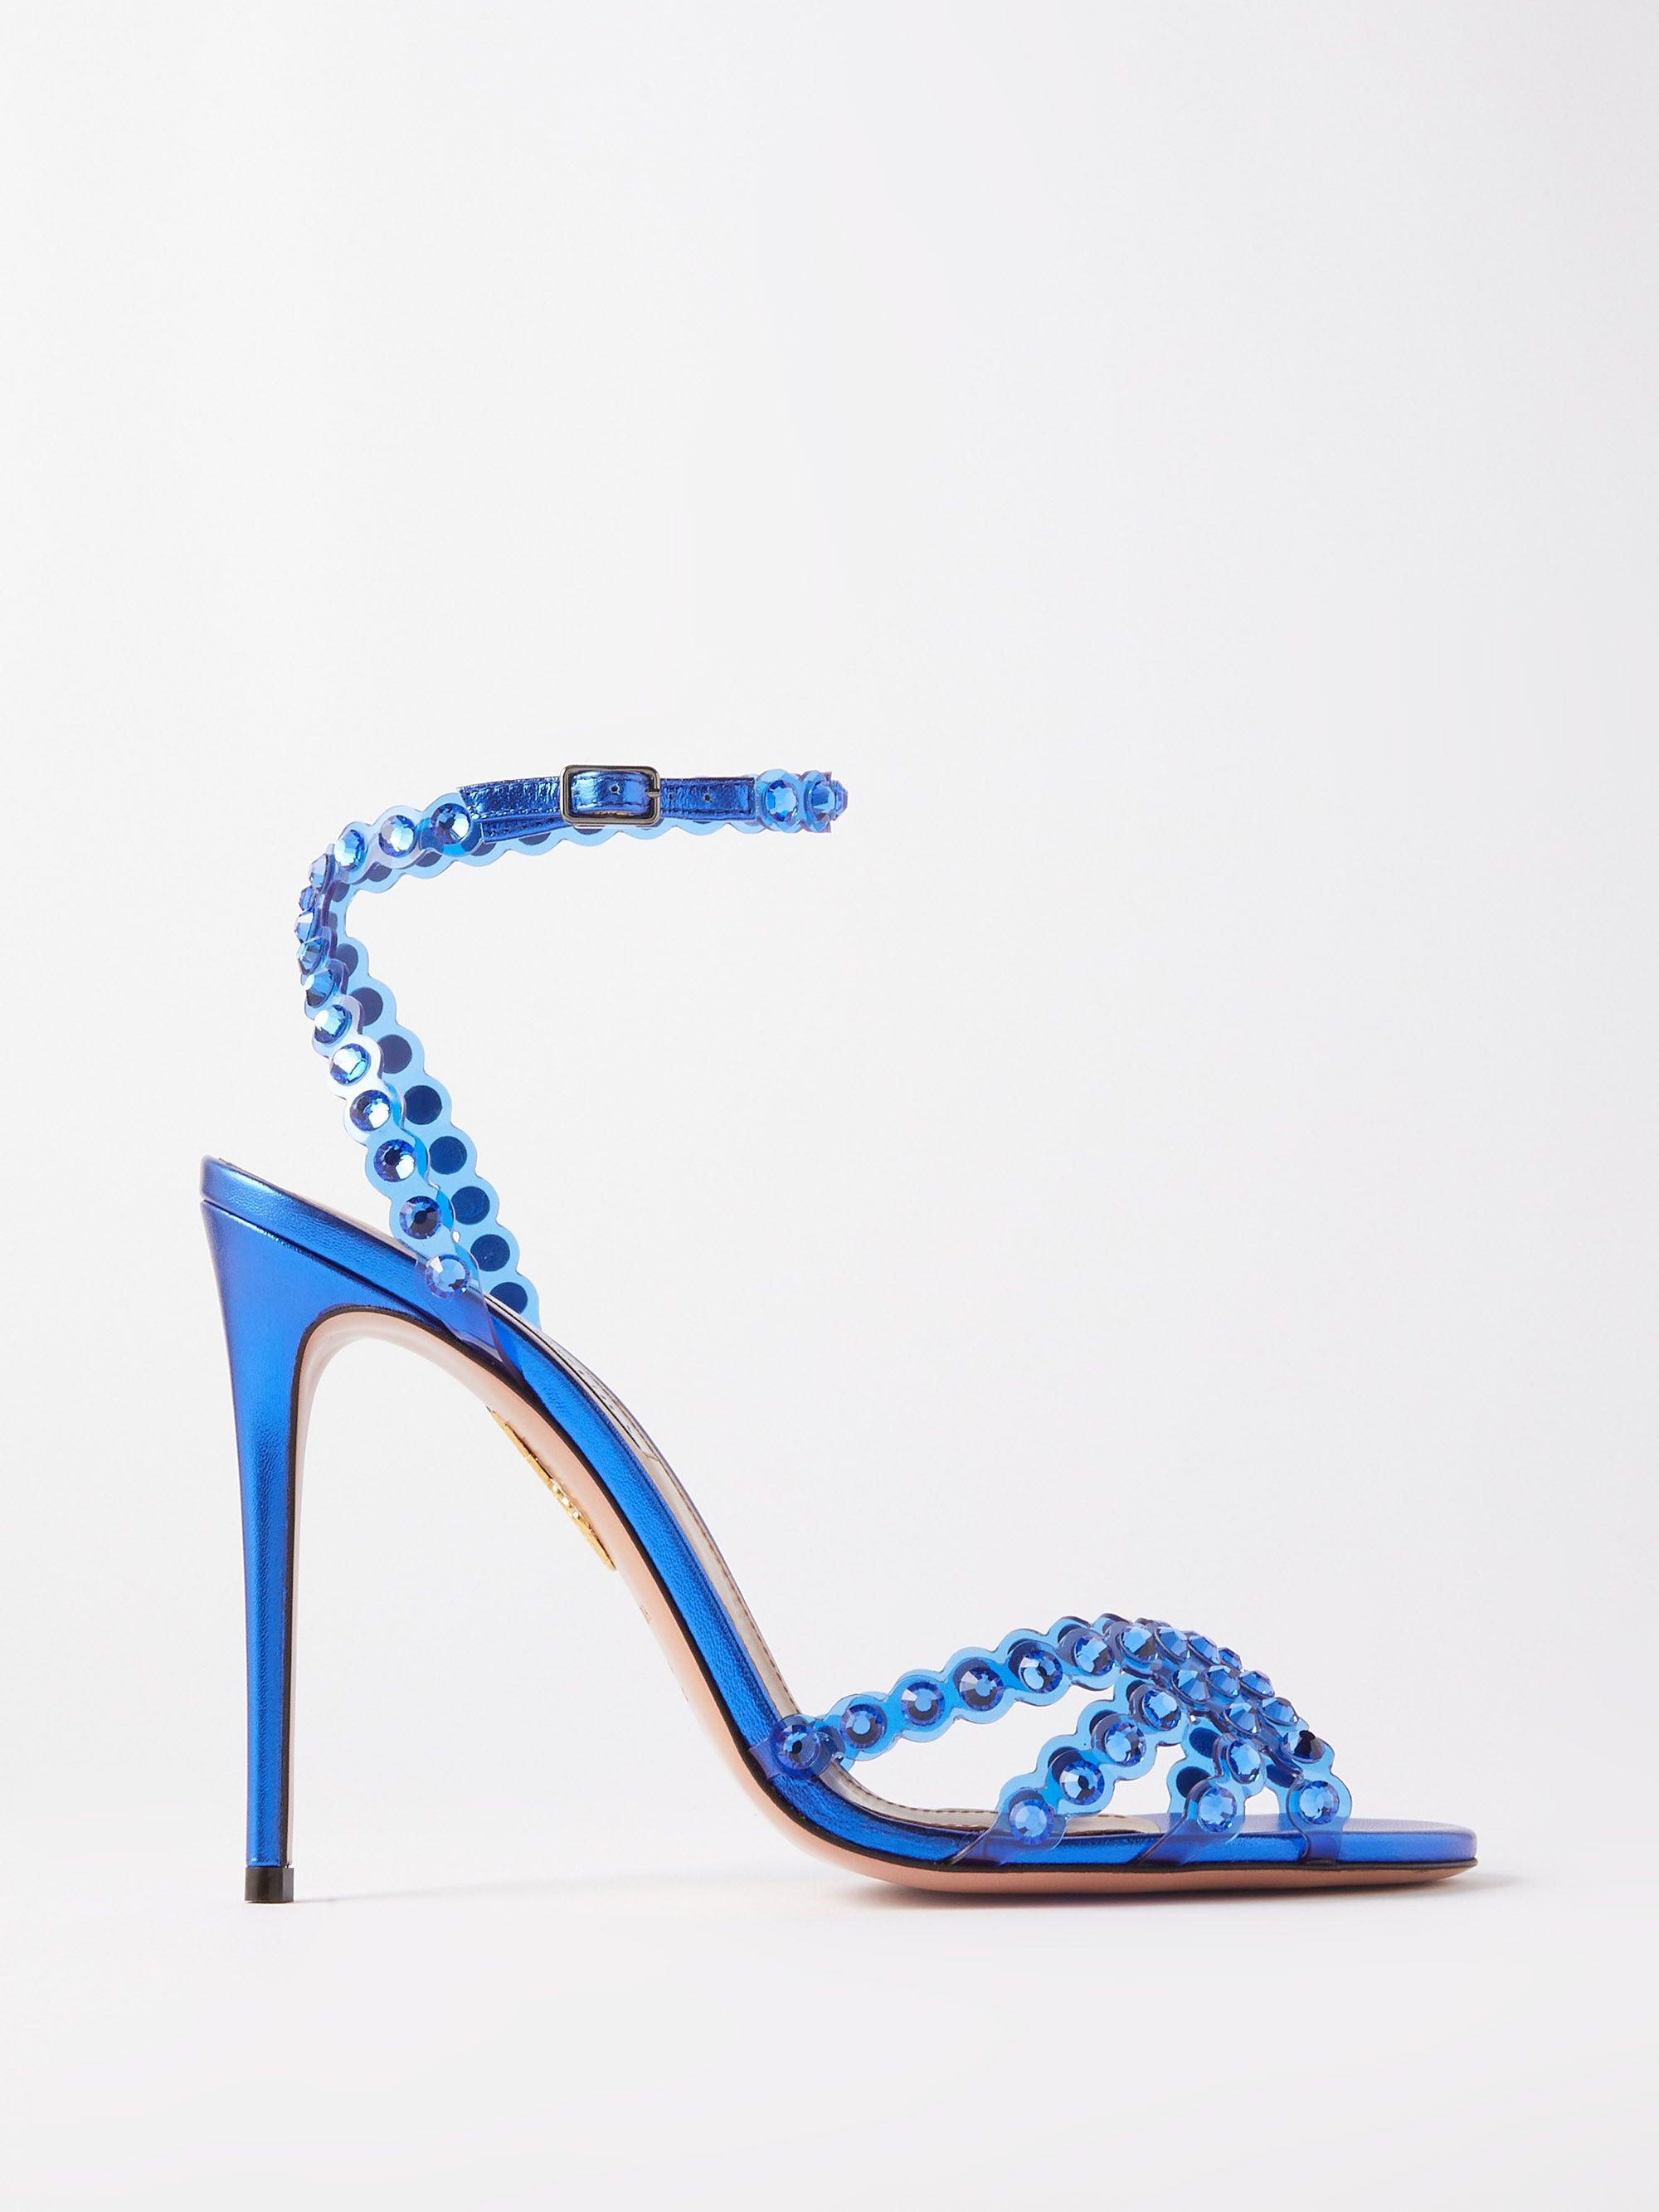 Aquazzura Tequila 105 Crystal-embellished Leather Sandals in Blue | Lyst